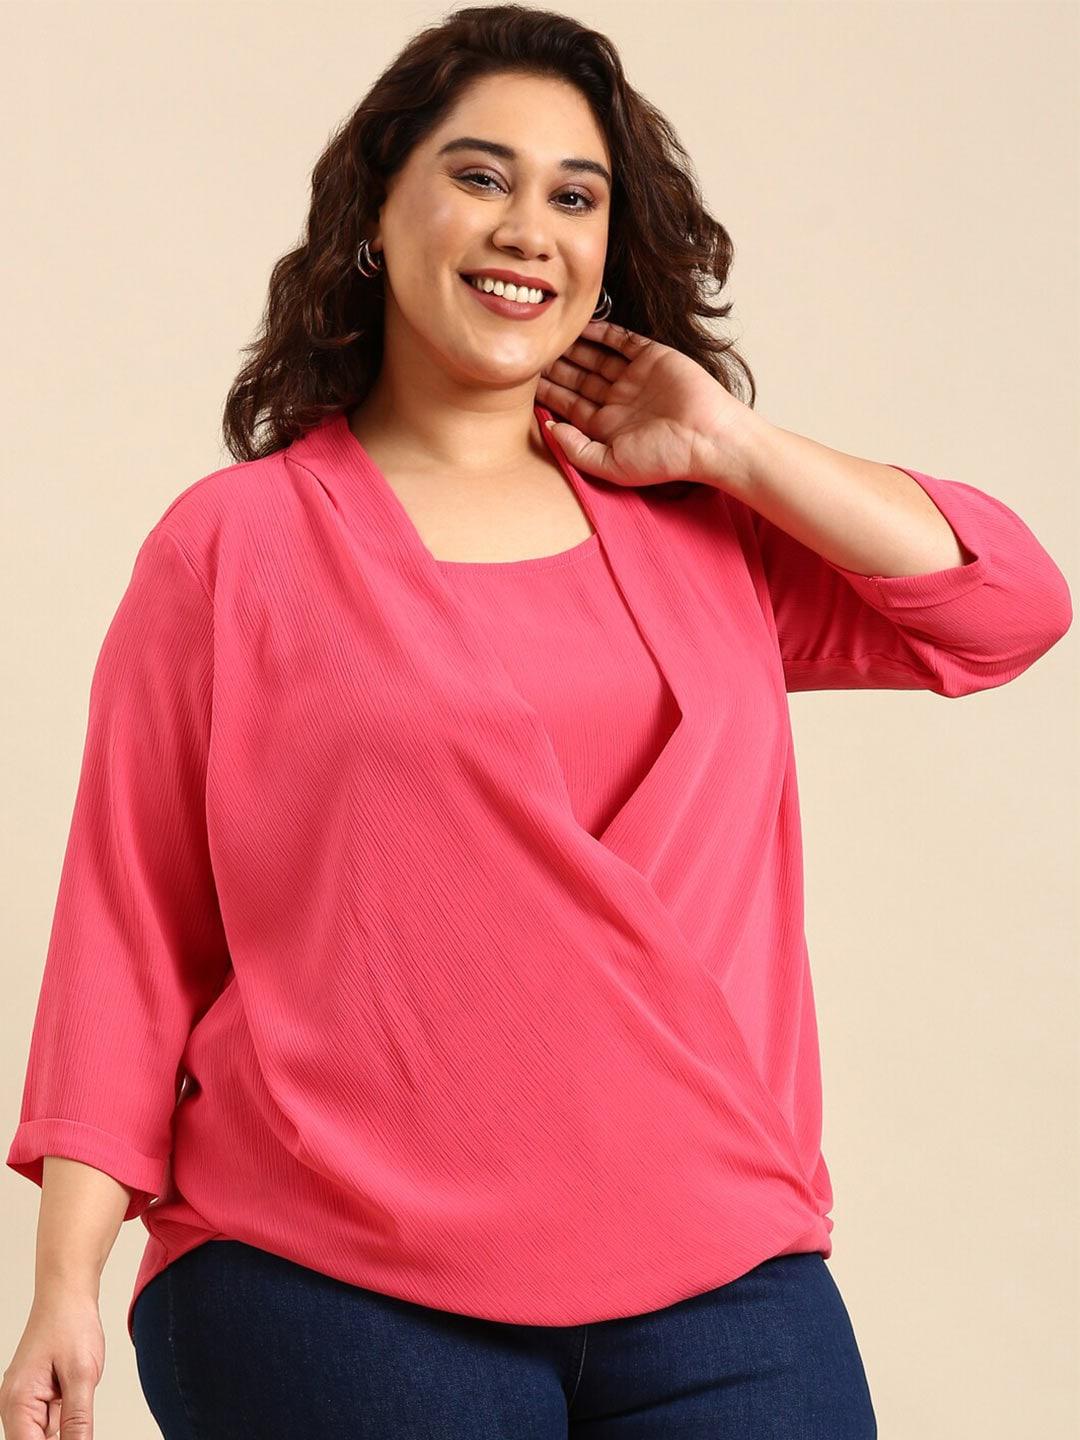 the-pink-moon-plus-size-v-neck-layered-regular-top